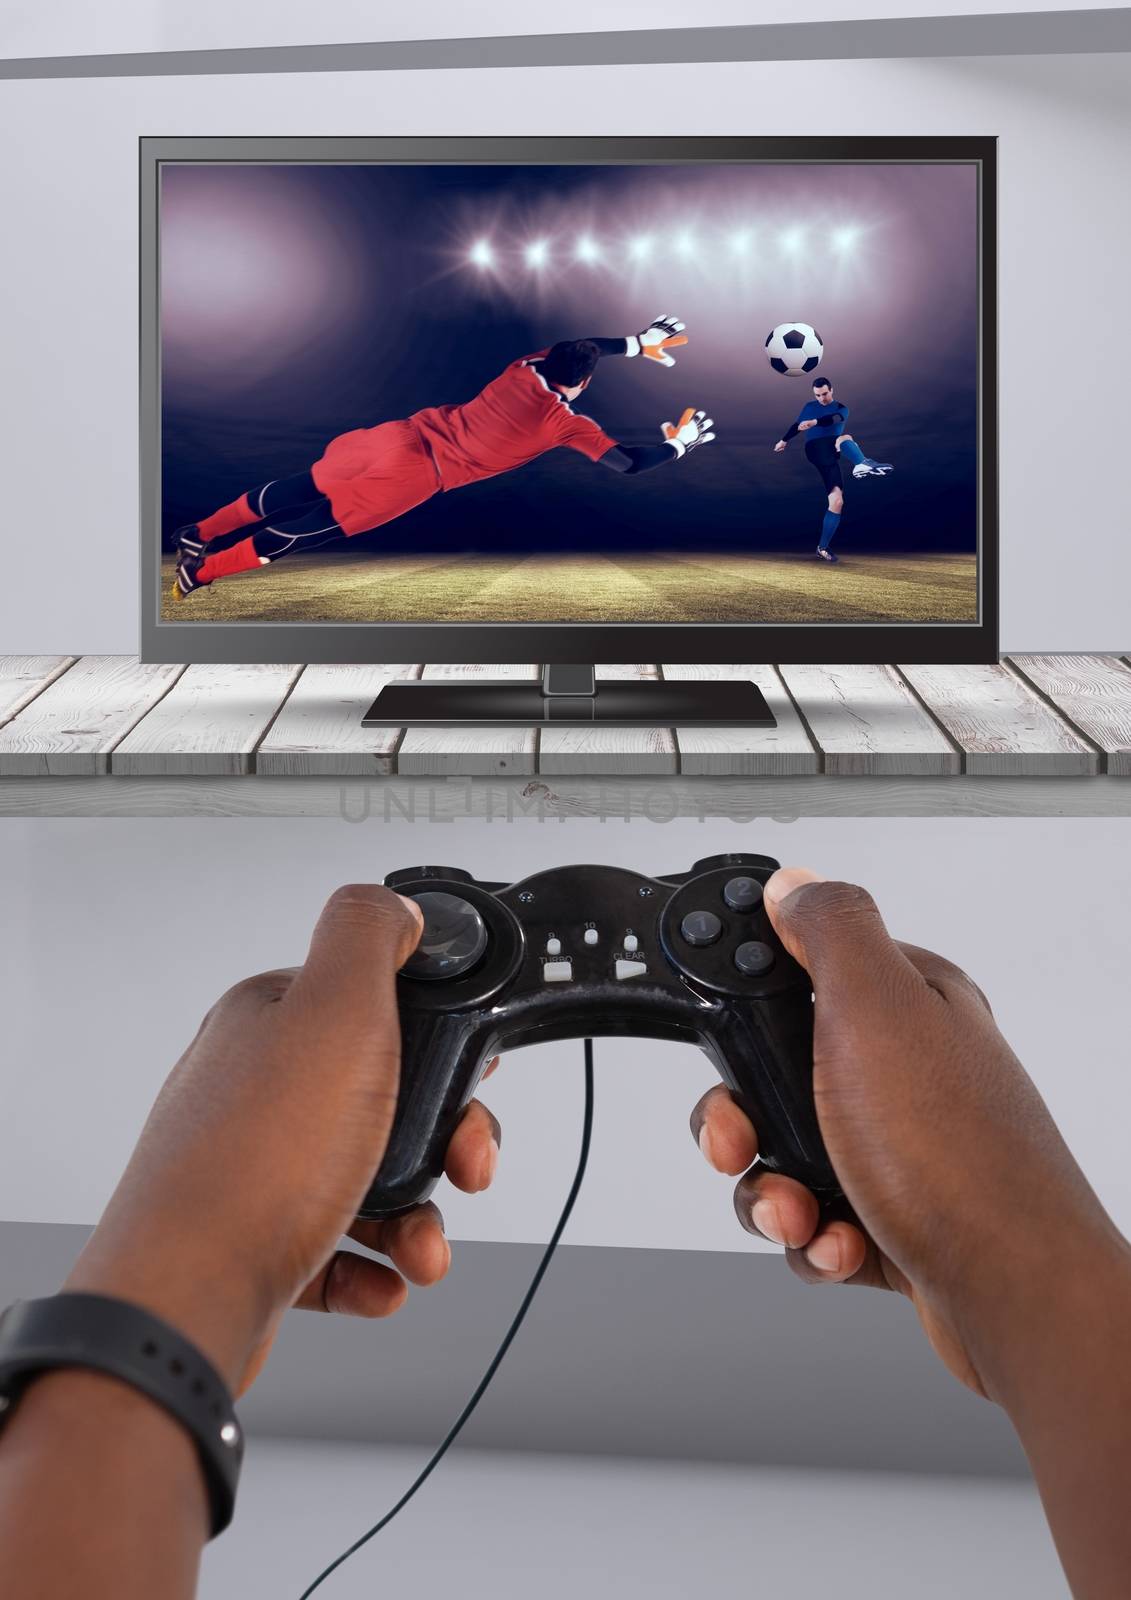 Playing soccer computer game with controller in hands by Wavebreakmedia